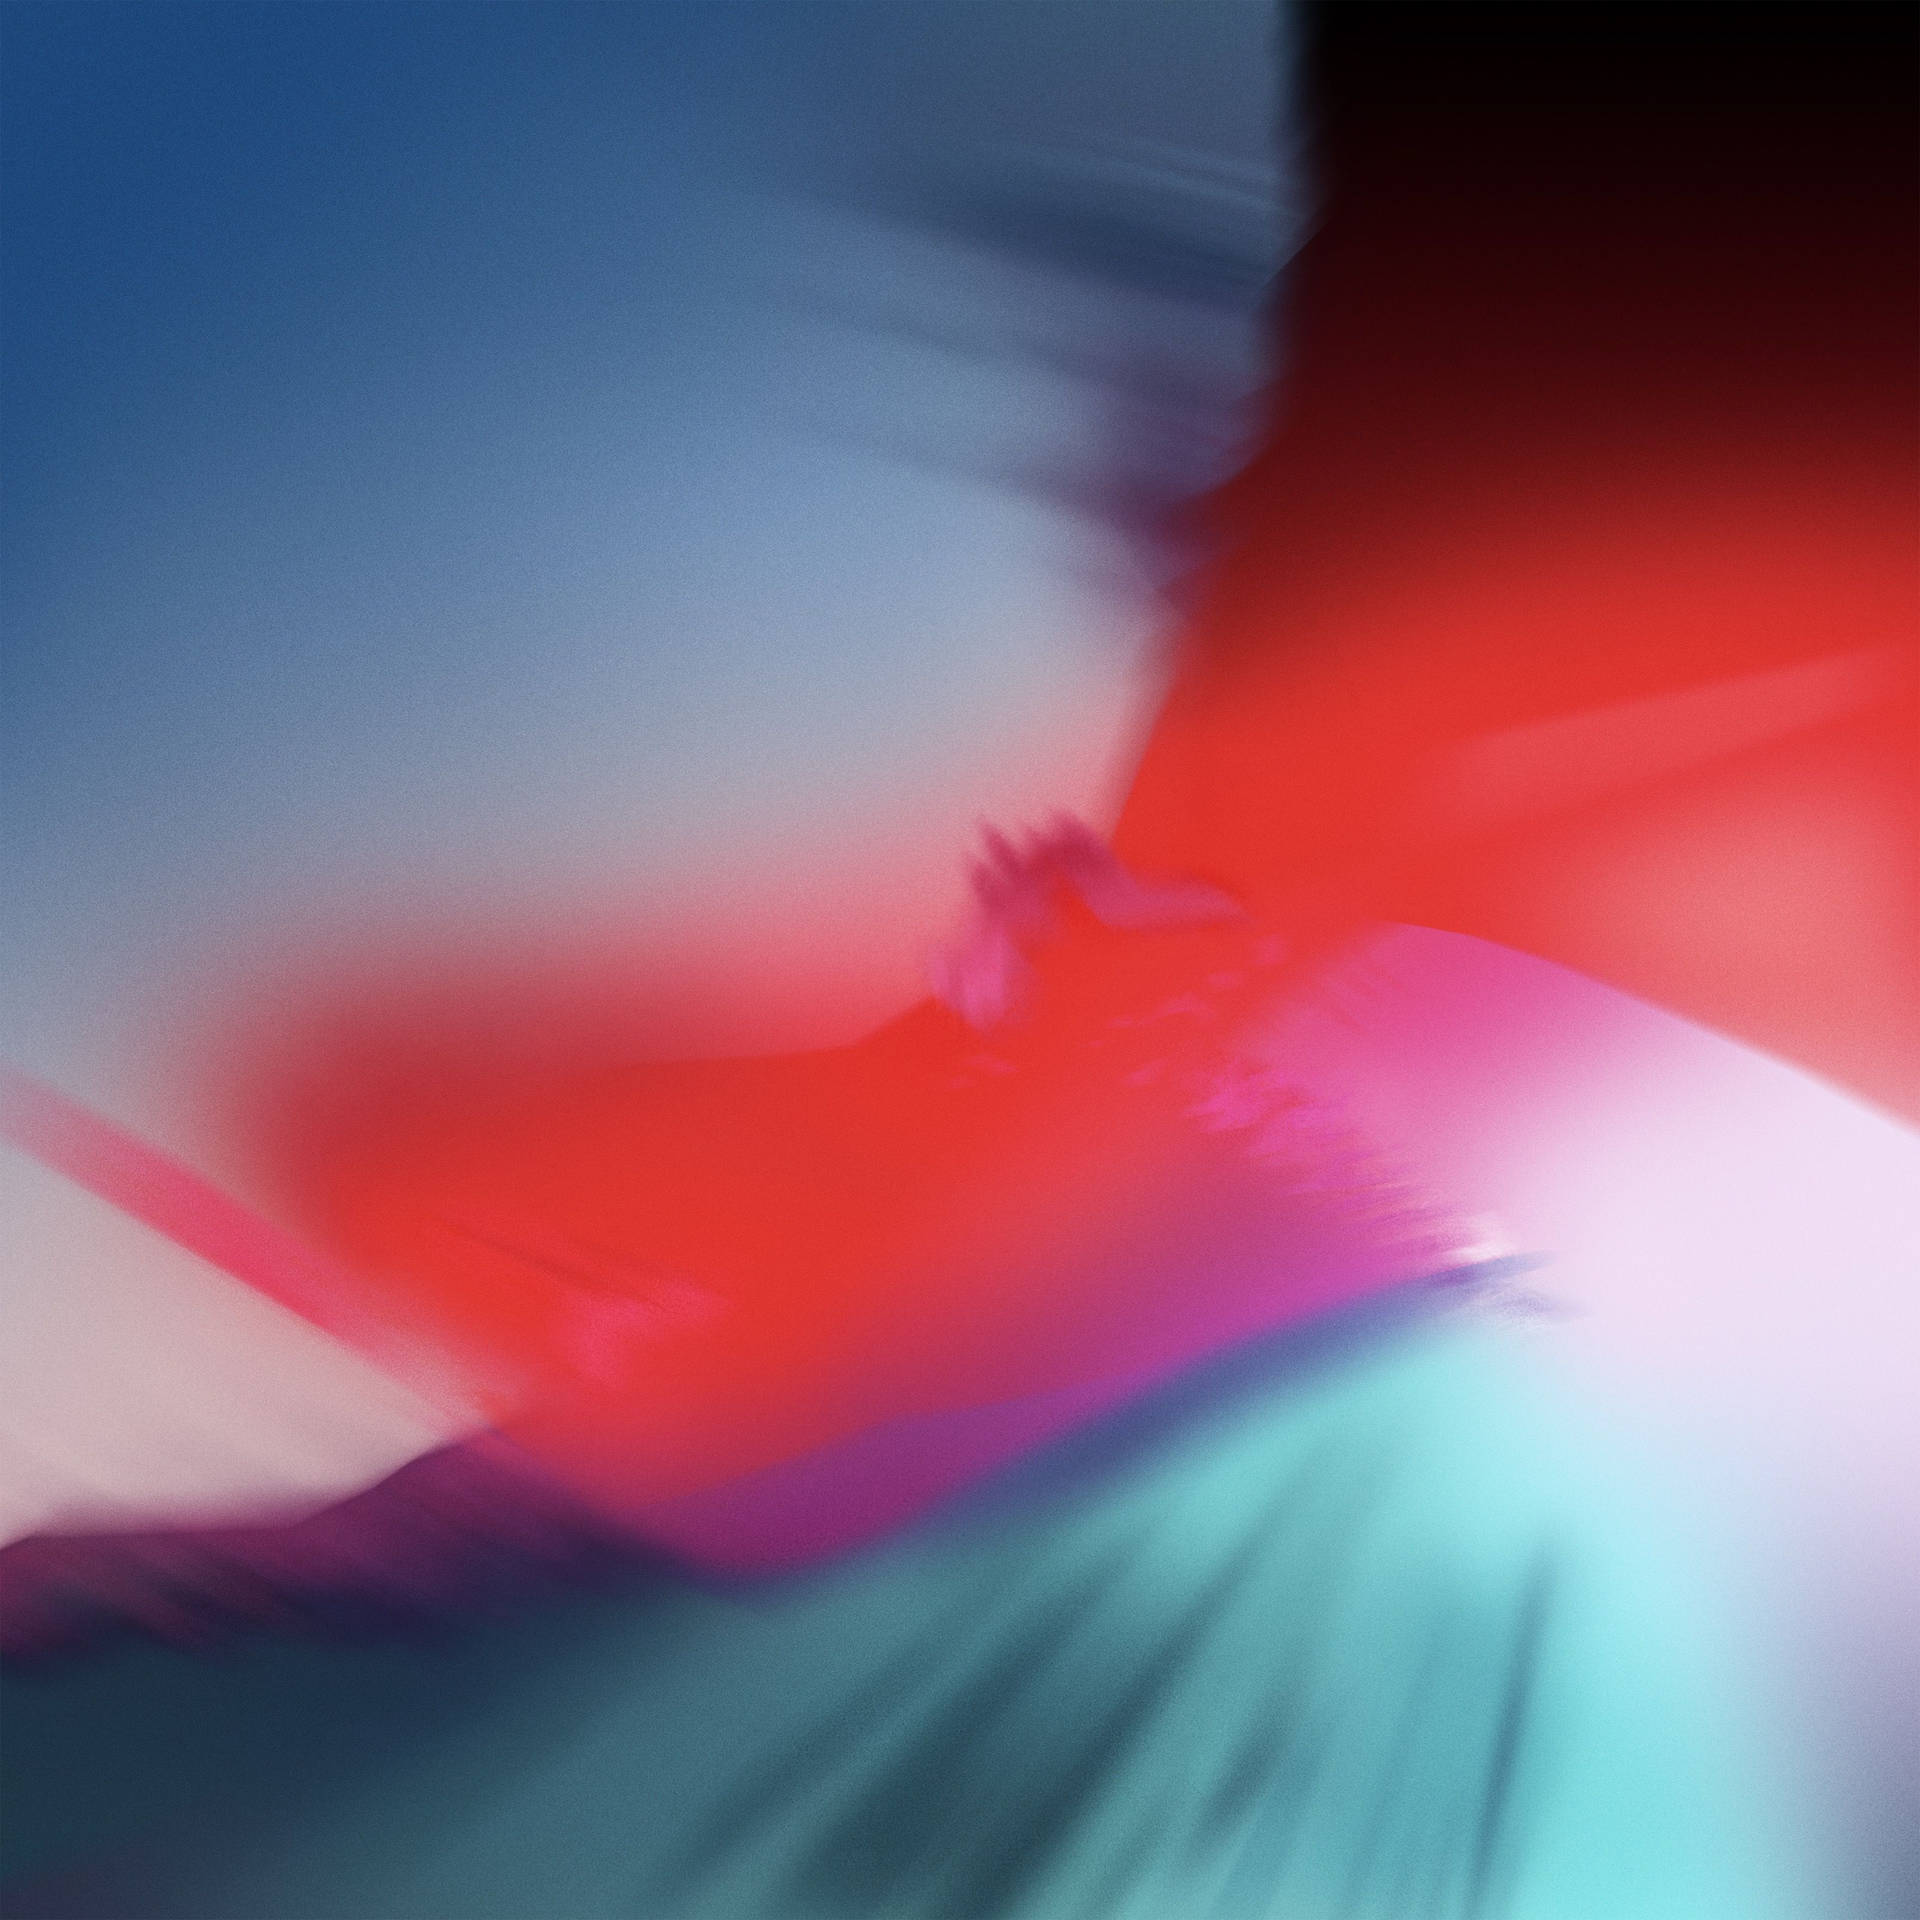 Ipad Pro Blurred Red And Blue Colors